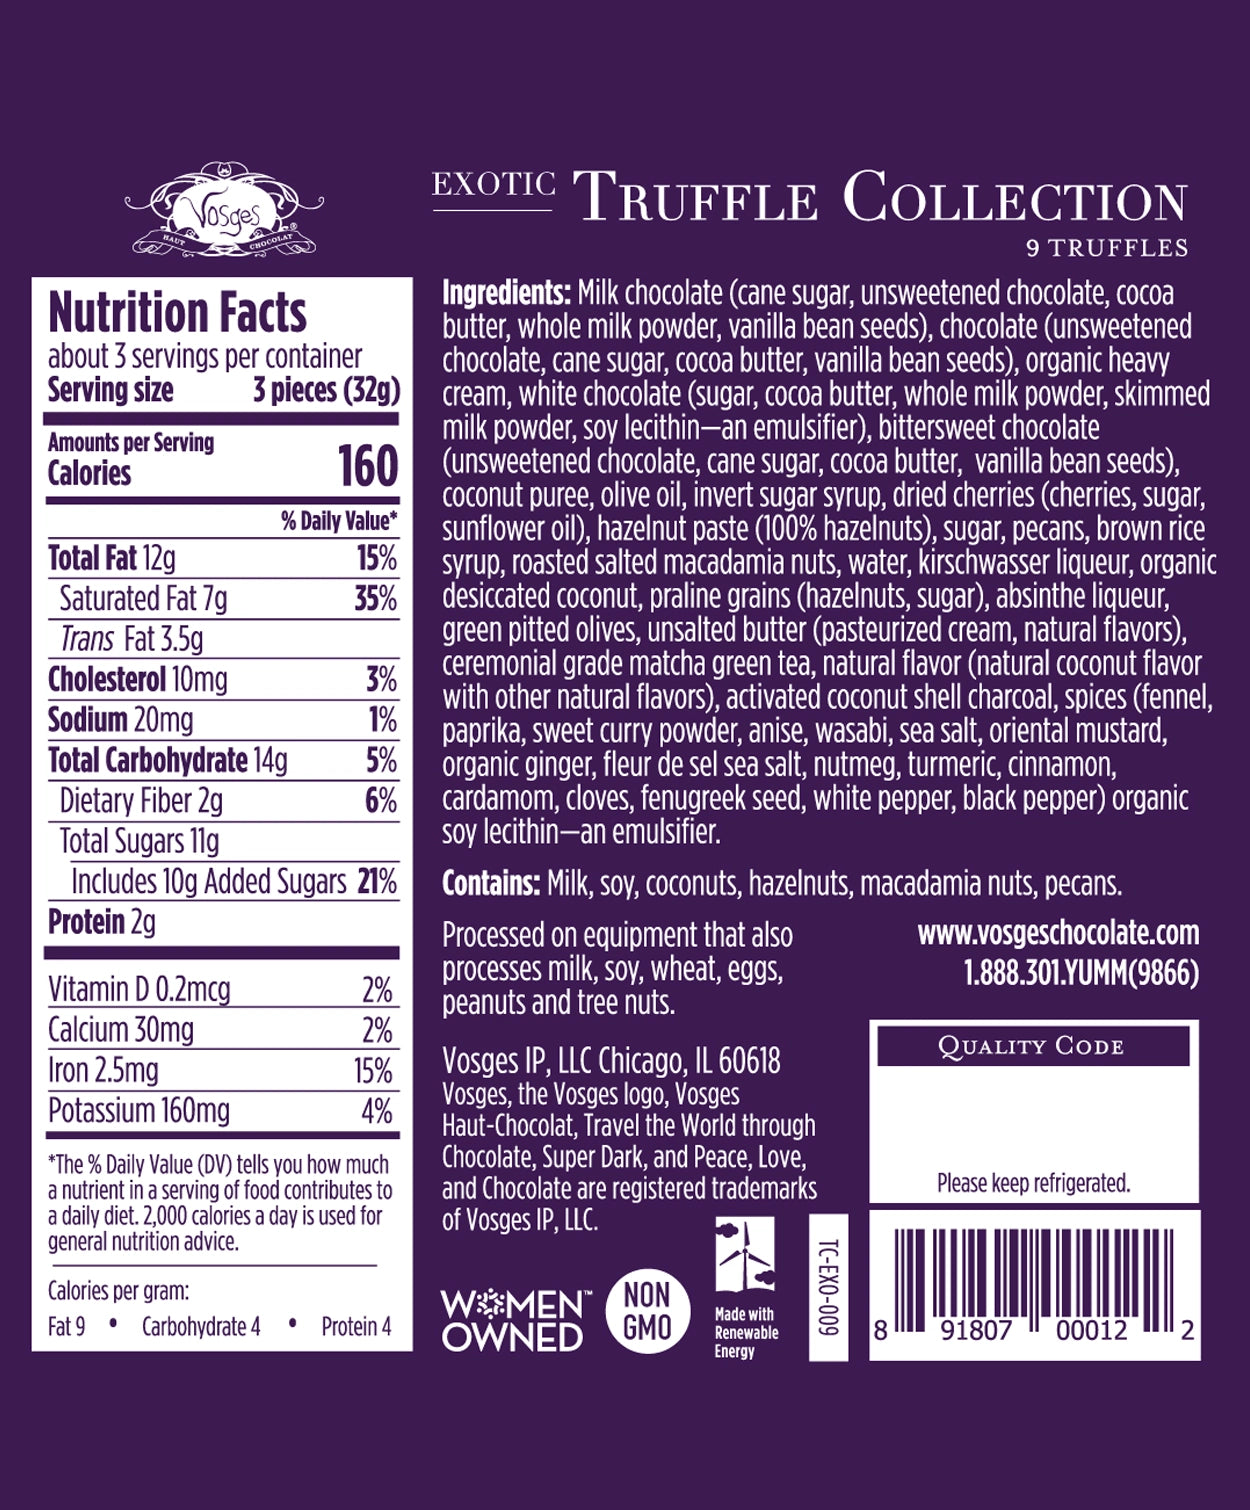 Nutrition Facts and Ingredients of Vosges Haut-Chocolat nine piece Exotic Chocolate Truffle Collection printed in white san-serif font on a dark purple background.